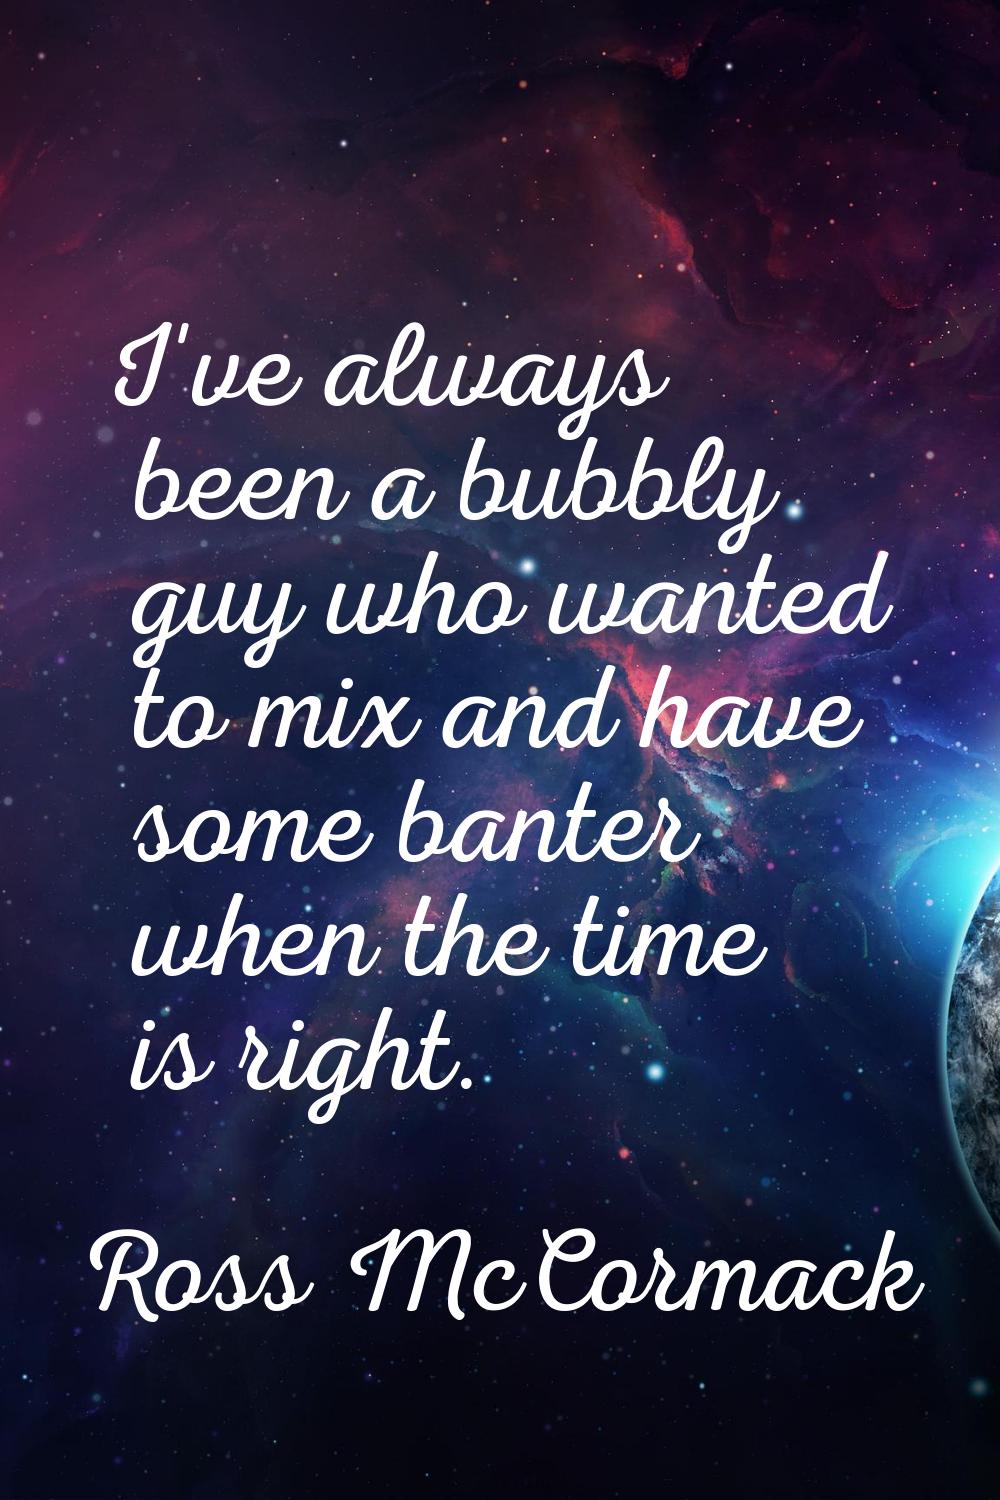 I've always been a bubbly guy who wanted to mix and have some banter when the time is right.